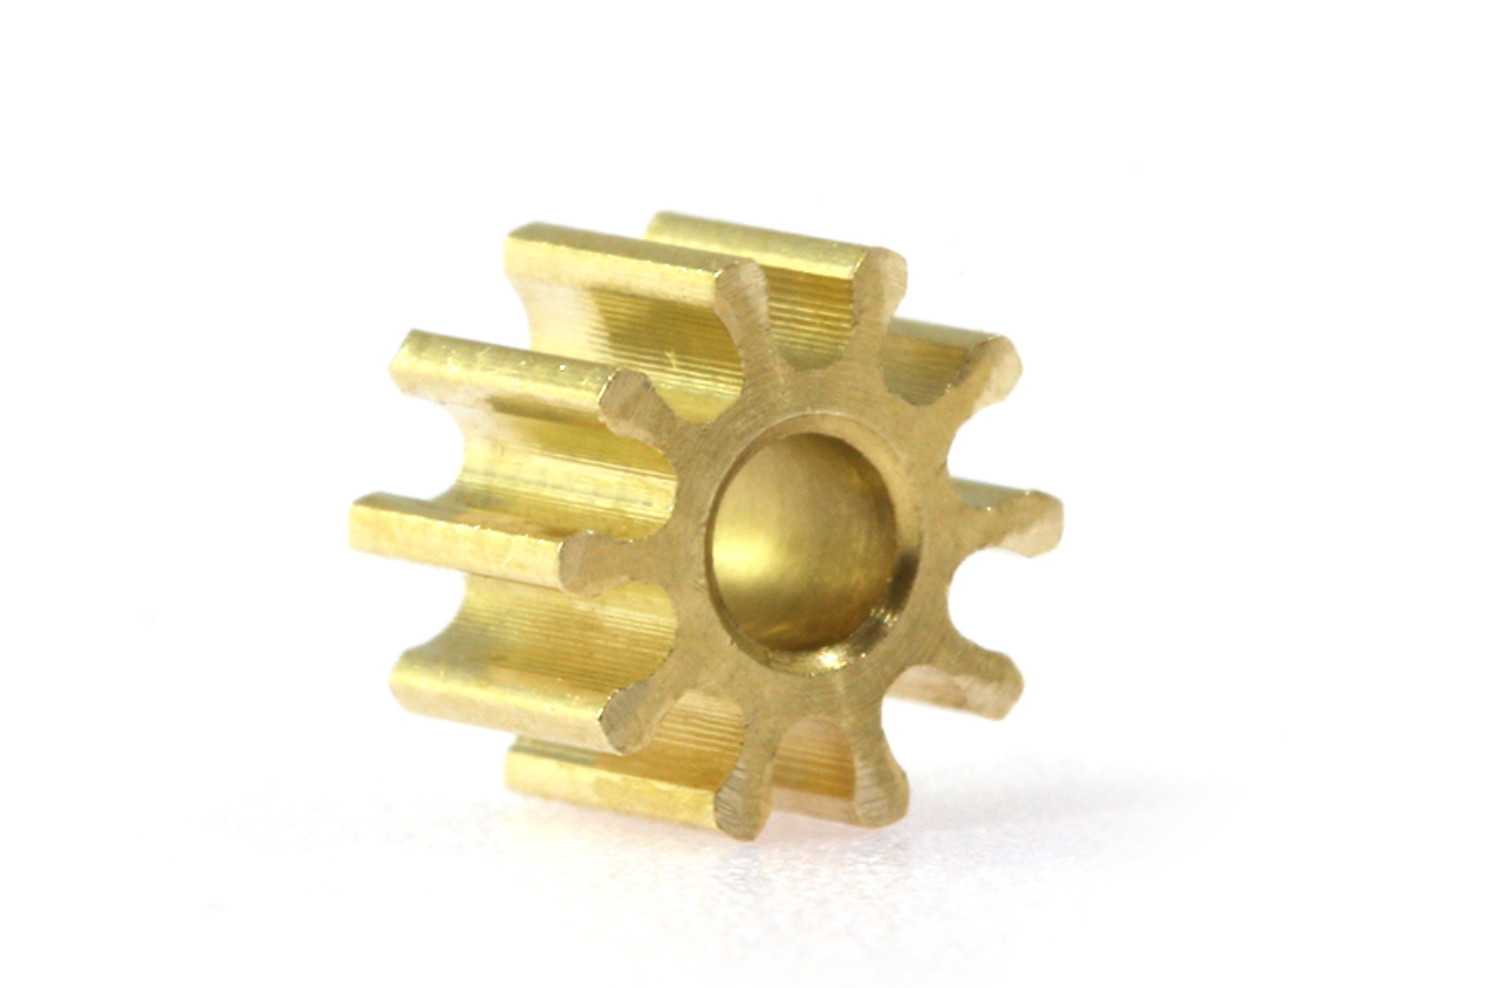 Scaleauto SC-1094A55 - Brass Pinion - 11T x 5.5mm - pack of 2